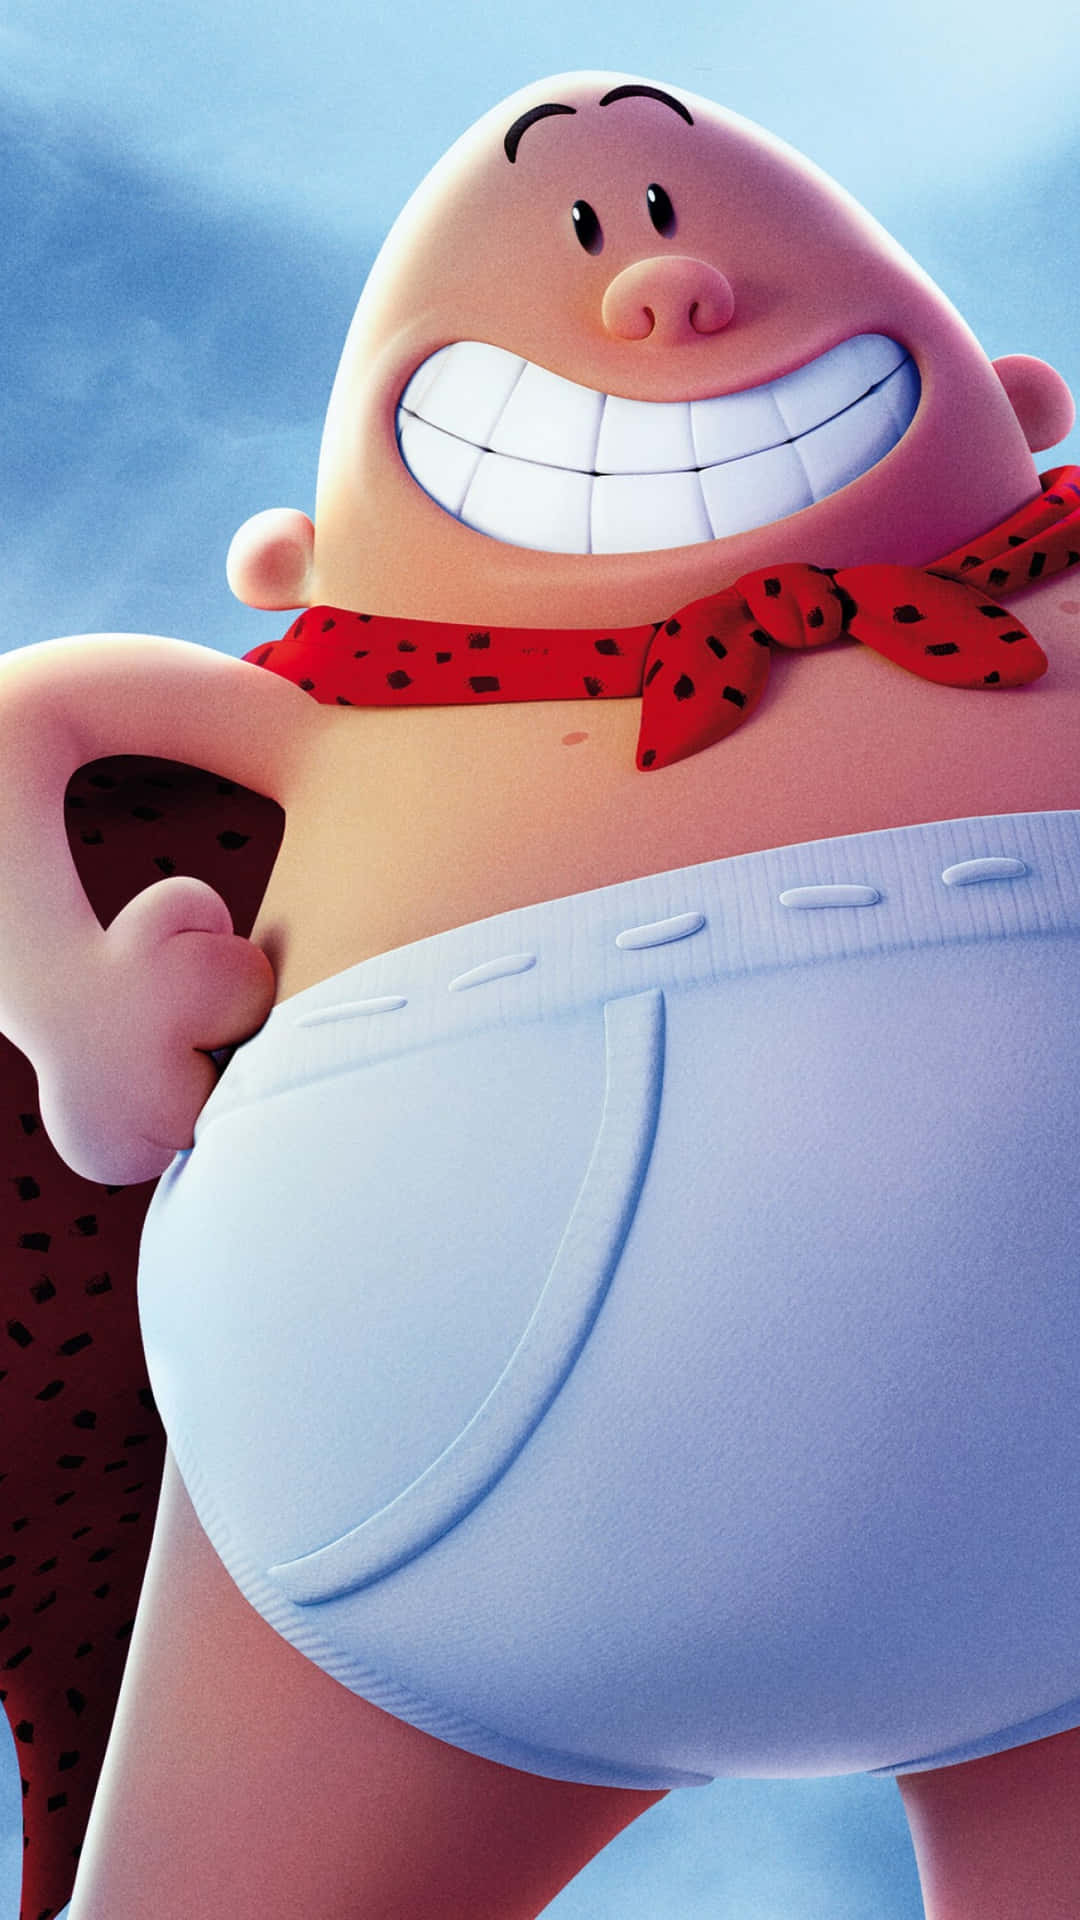 Arms On Waist Captain Underpants: The First Epic Movie Wallpaper